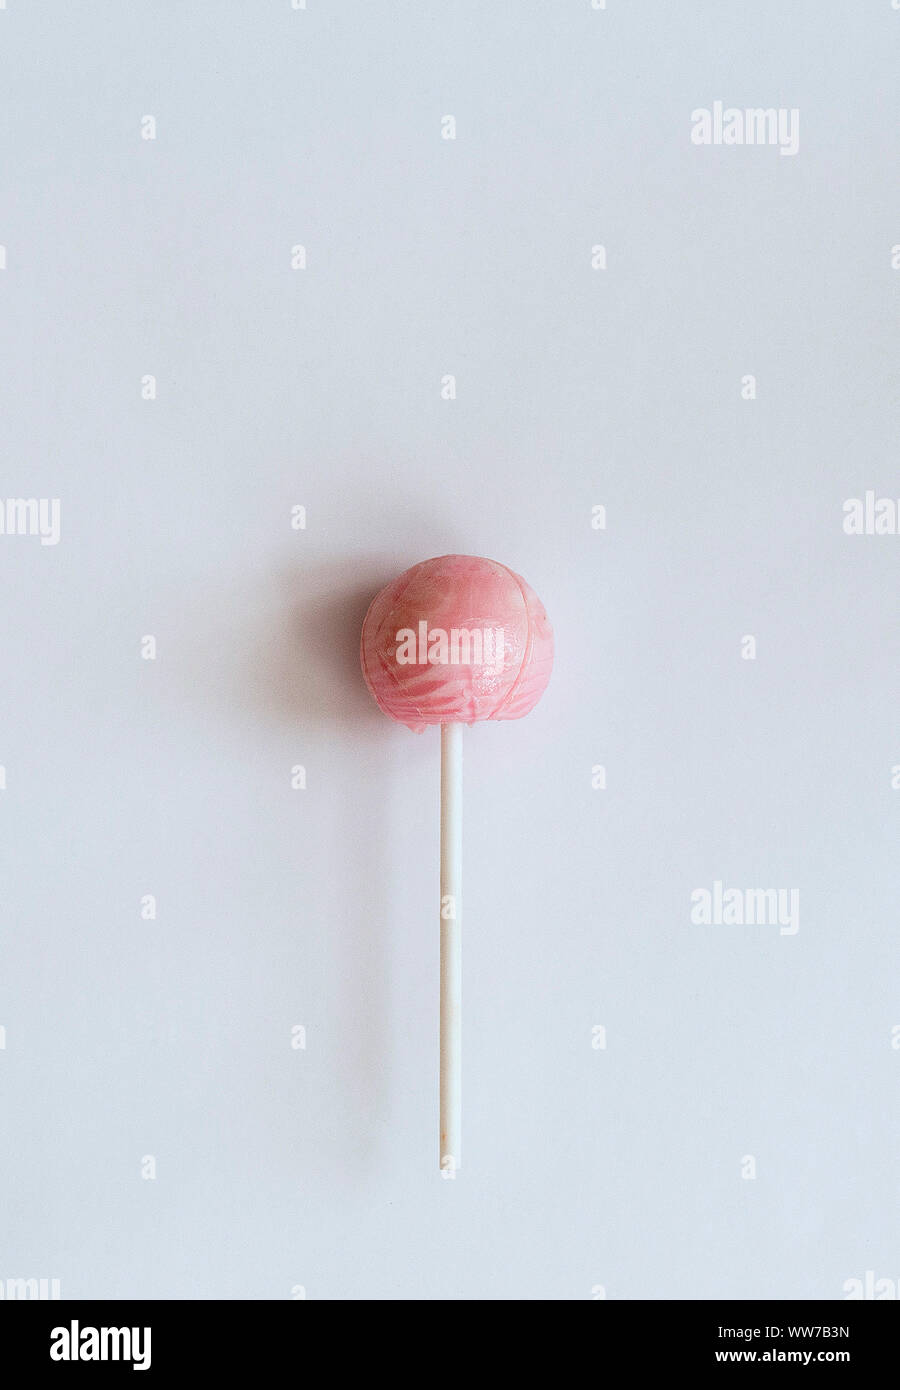 Lollipop, lolly, pink, white background Stock Photo